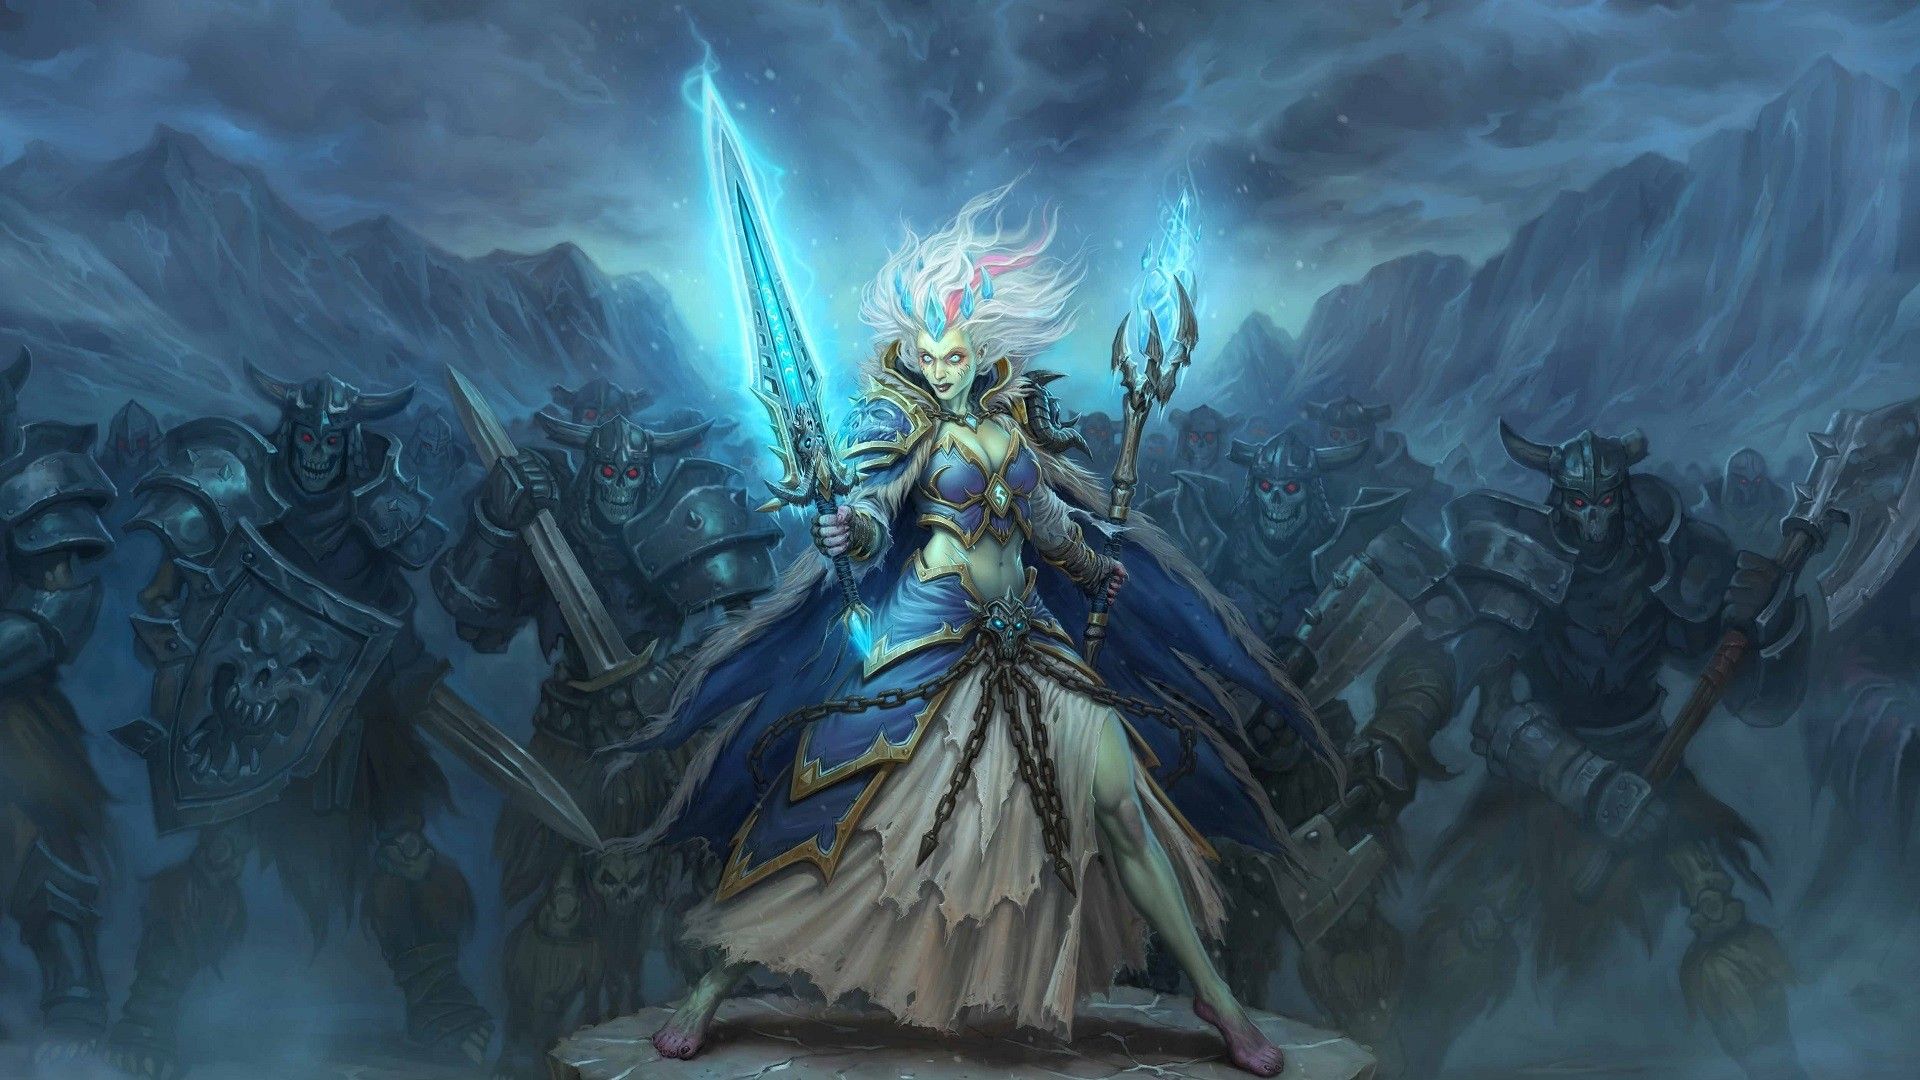 1920x1080 74+ Death Knight Wallpapers on WallpaperPlay.